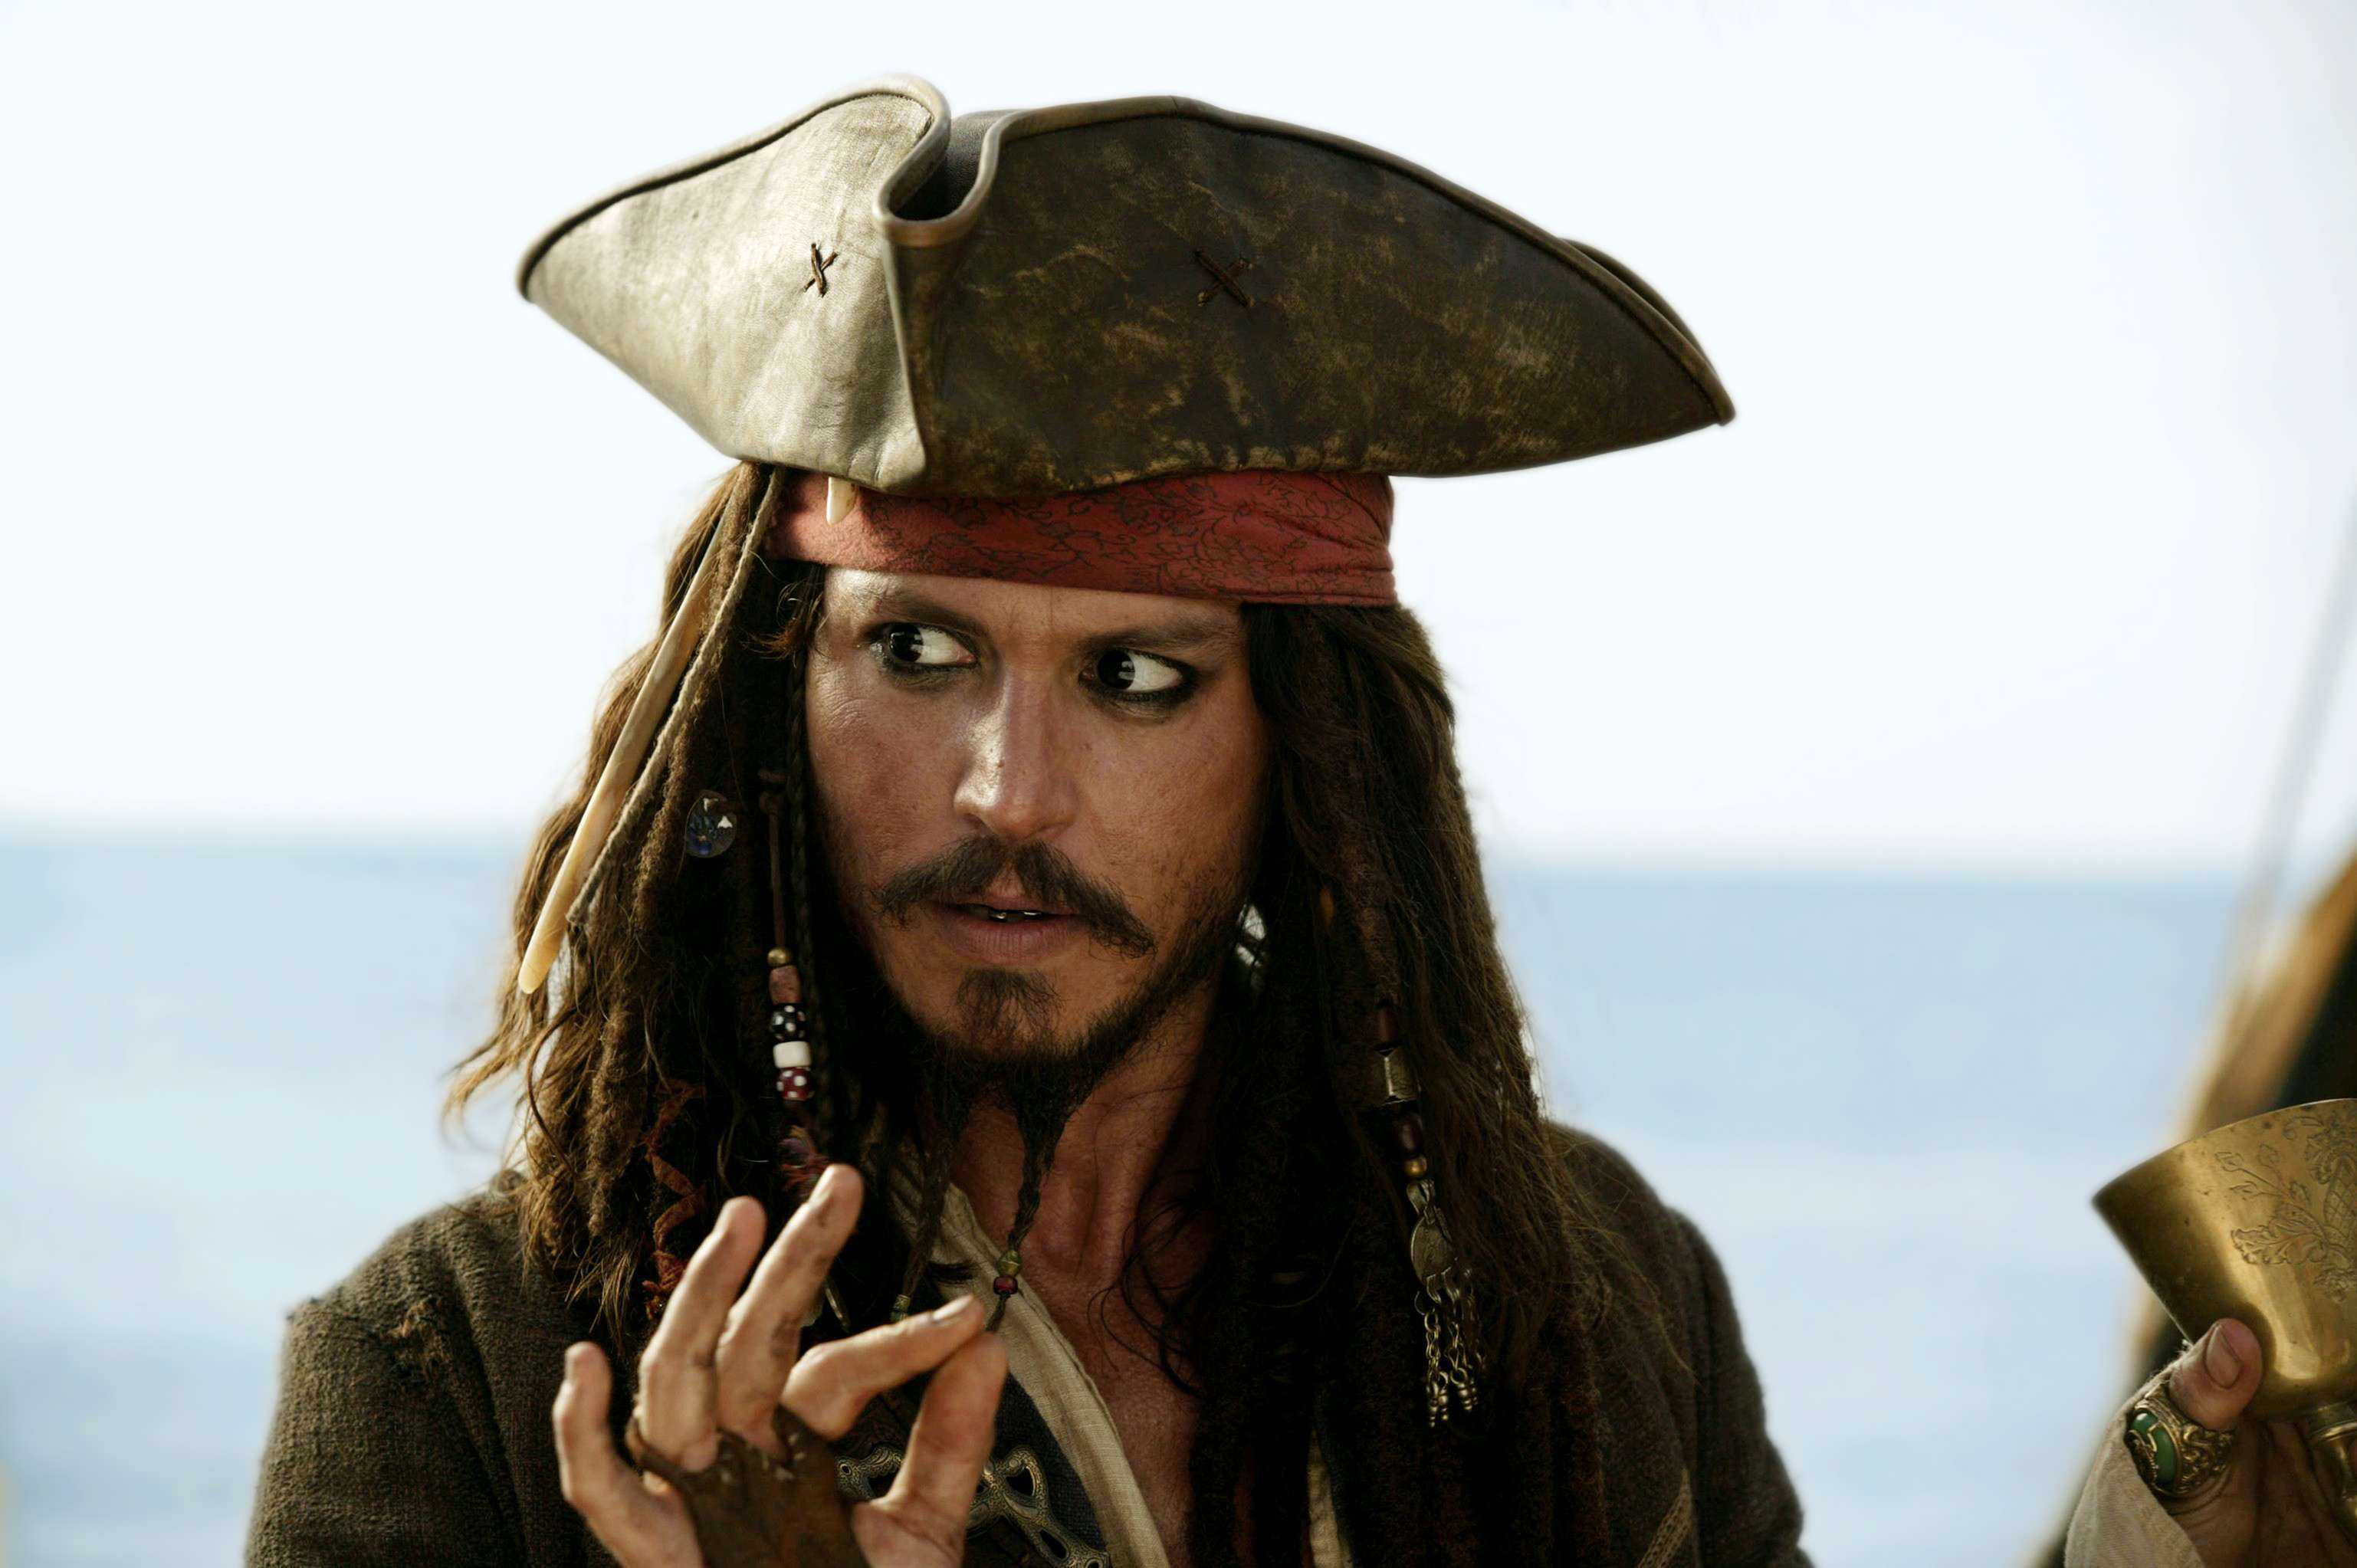 jack sparrow, pirates of the caribbean, movie, pirates of the caribbean: dead man's chest, johnny depp, pirate cellphone